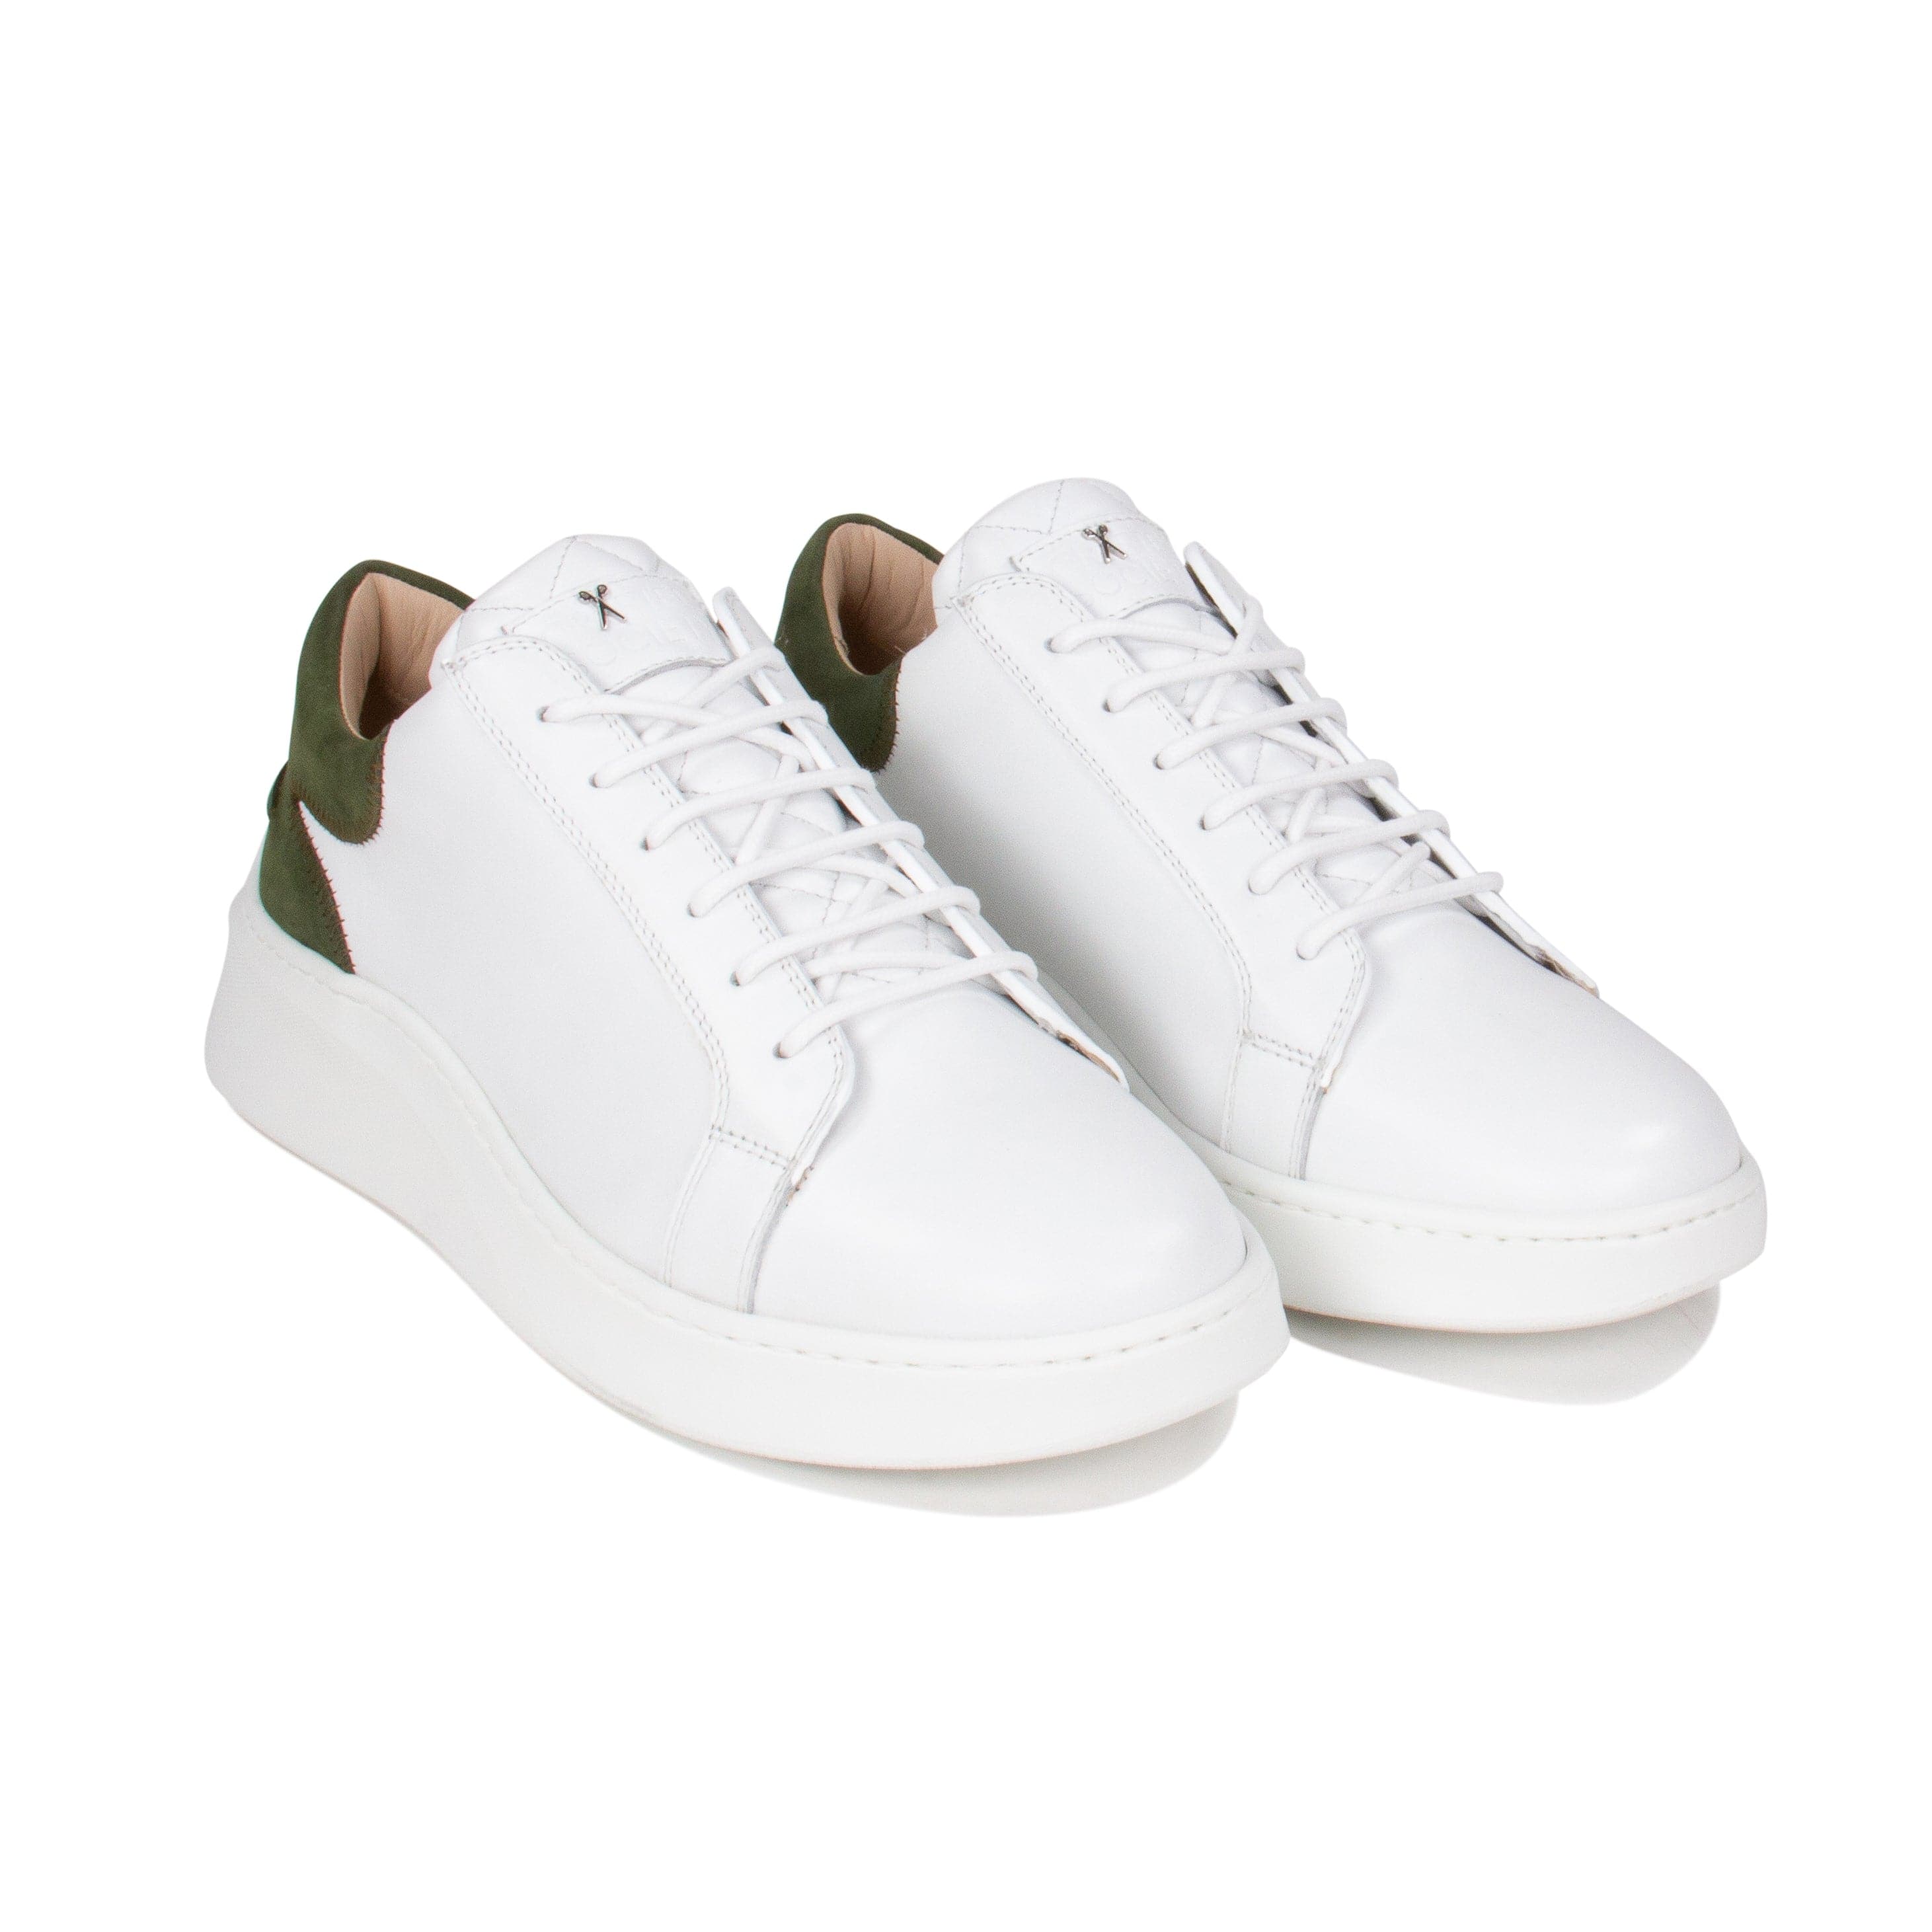 Matteo Low Top Sneaker | White & Olive Full Grain Leather | White Outsole | Made in Italy | Size 42